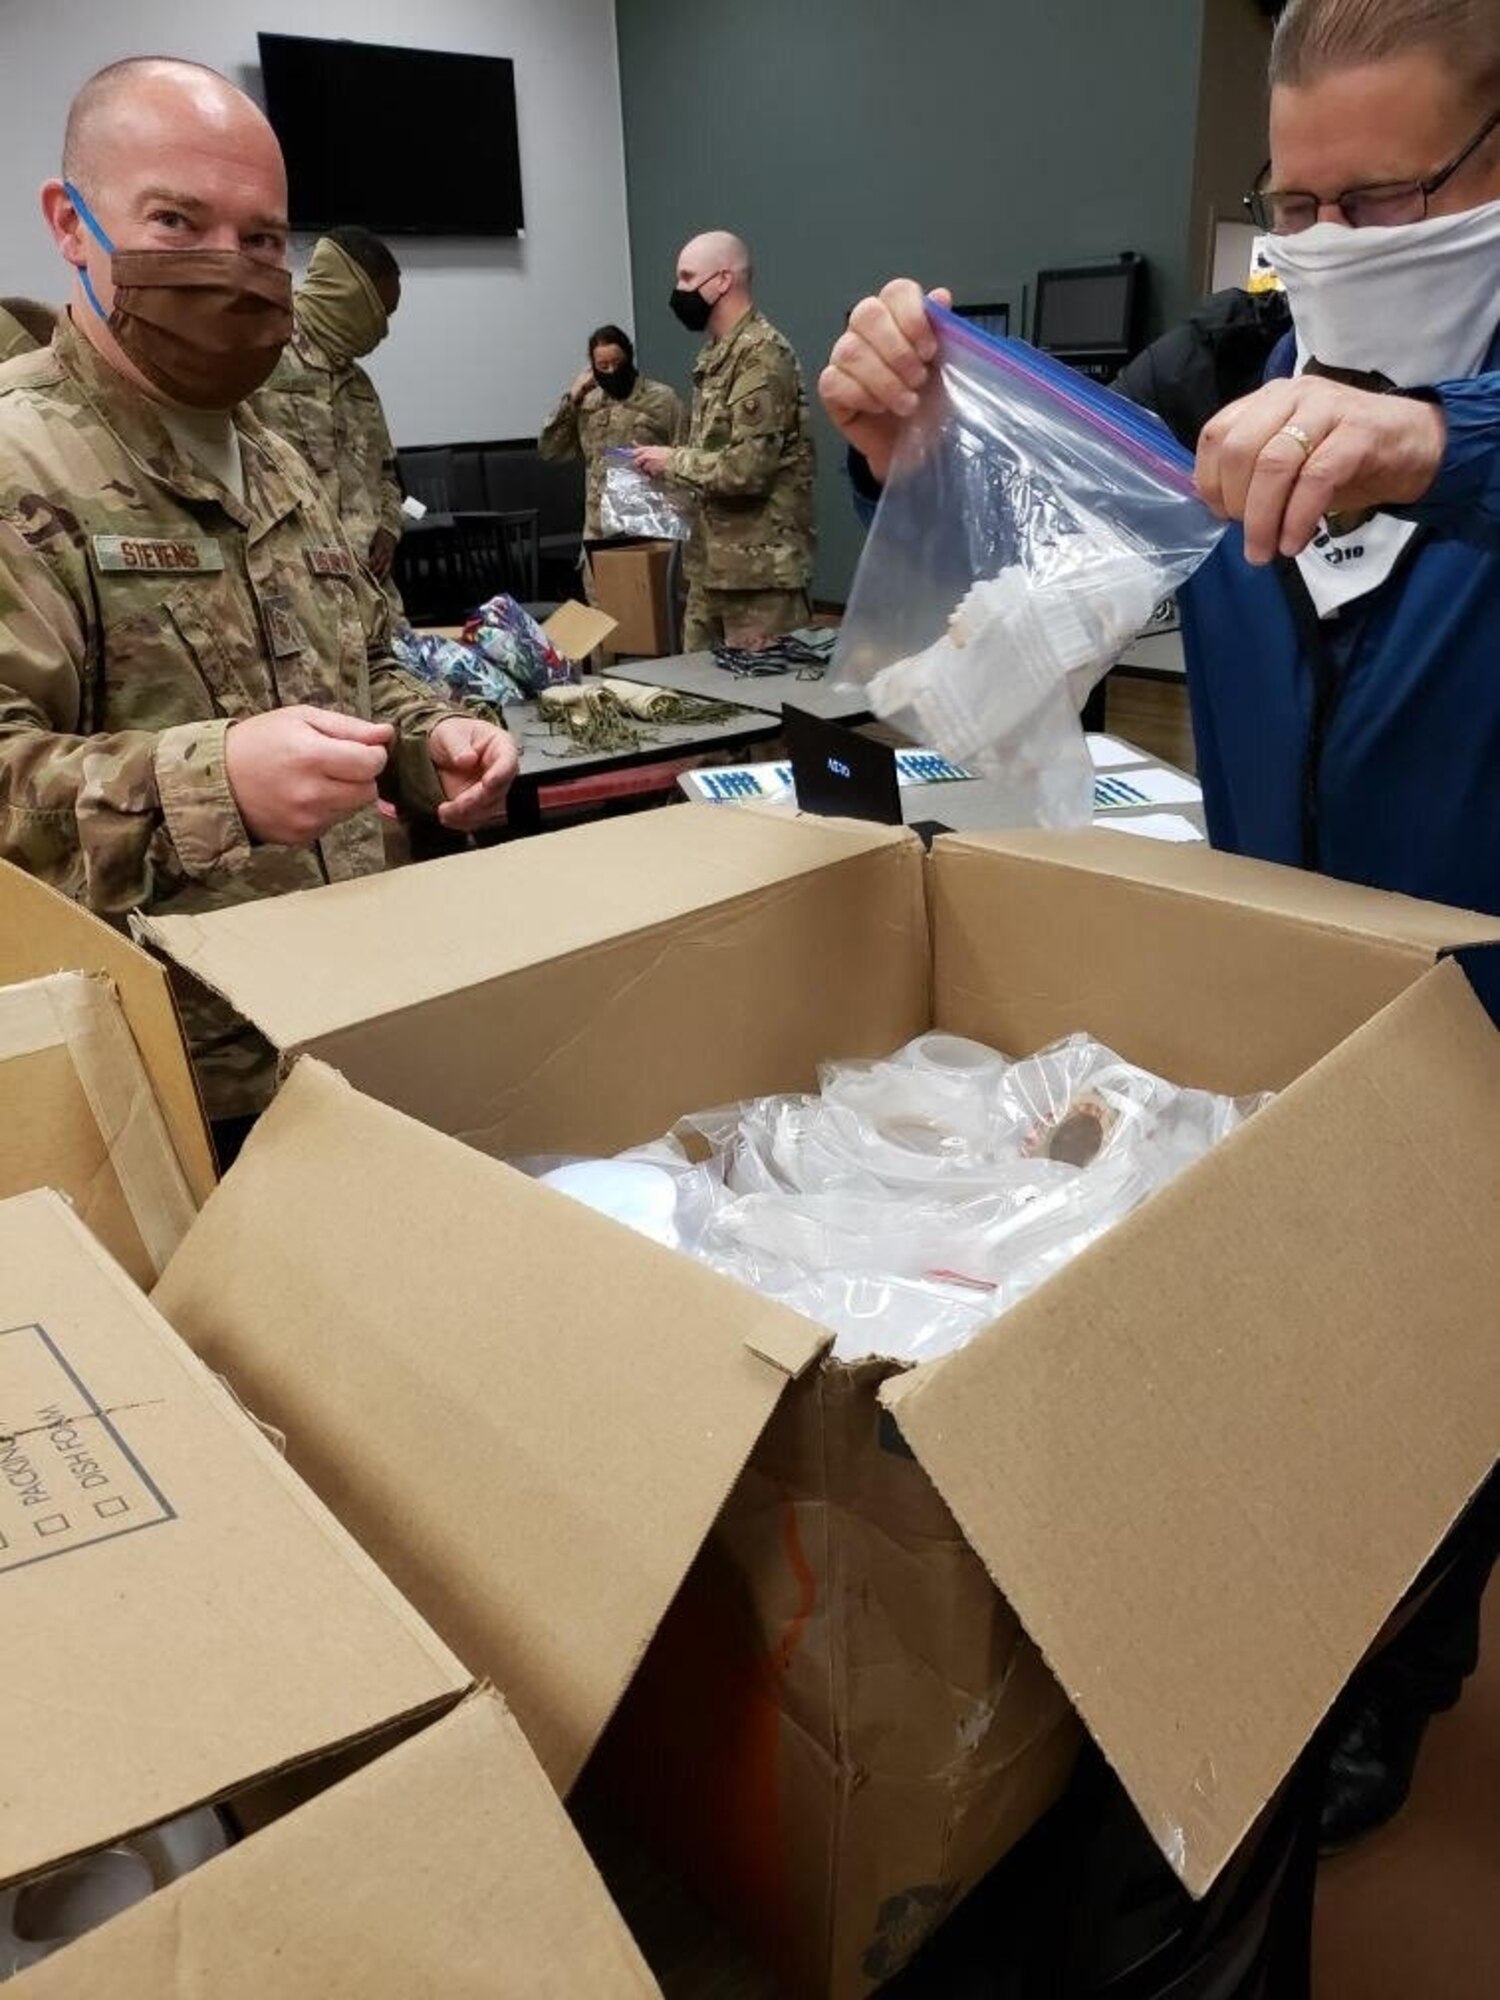 Members of the 11th Security Support Squadron unbox personal protective equipment received through a pilot initiative called the Air Force Rapid Agile Manufacturing Platform at Joint Base Andrews, Md., May 15, 2020. The framework is designed to keep the Air Force supply system independent of the civilian medical market. (U.S. Air Force courtesy photo)